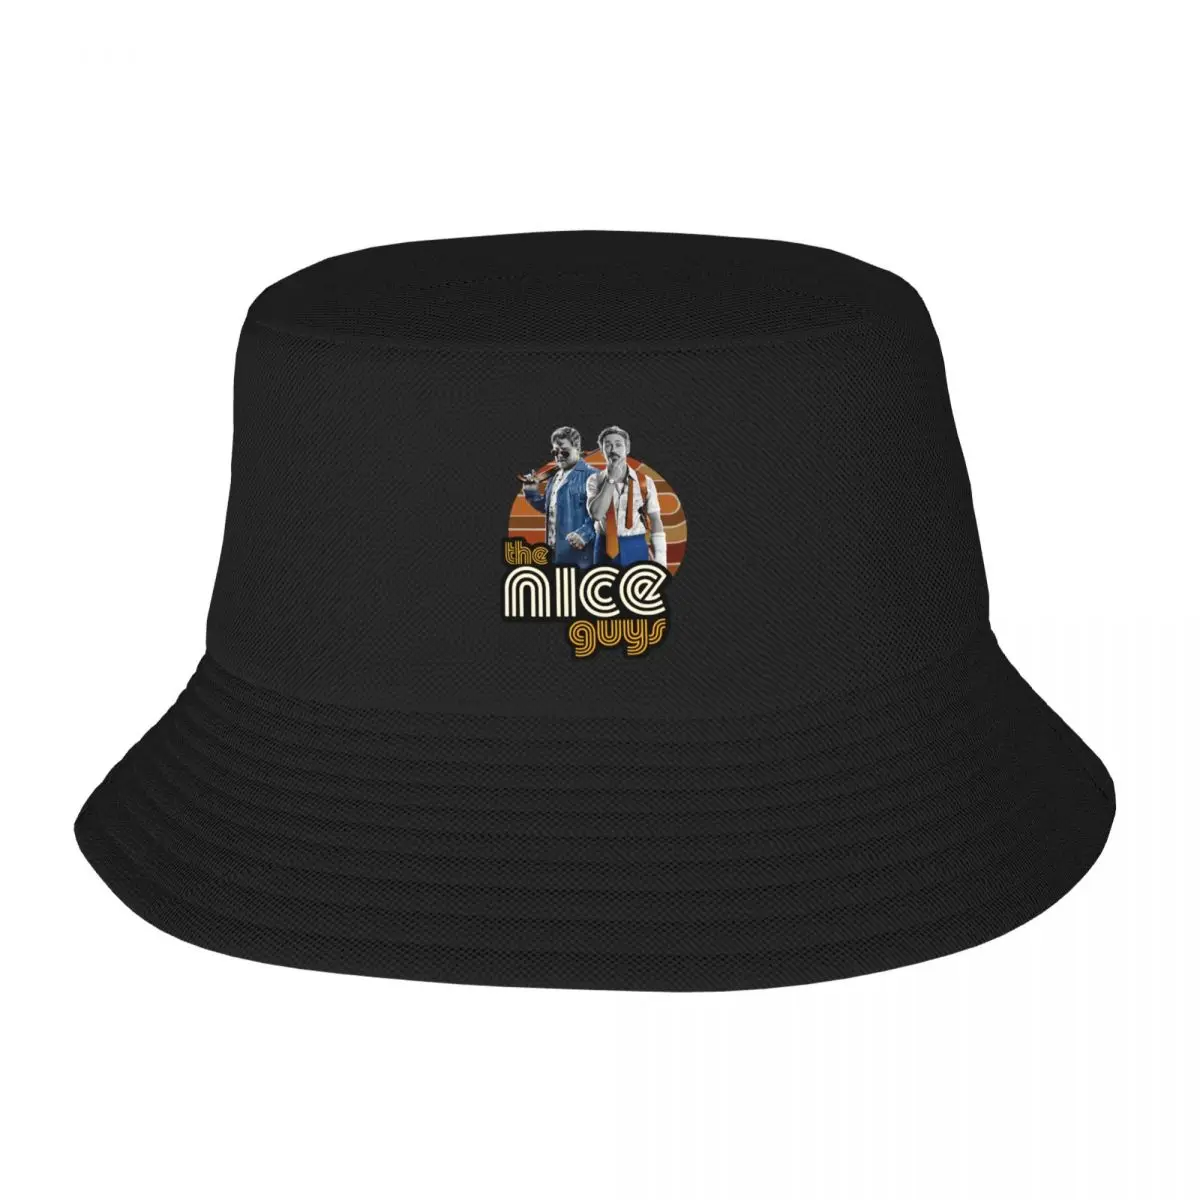 

New For Mens Womens The Nice Guys Idol Gift Fot You Bucket Hat party hats Sunscreen Golf Wear Men Women's